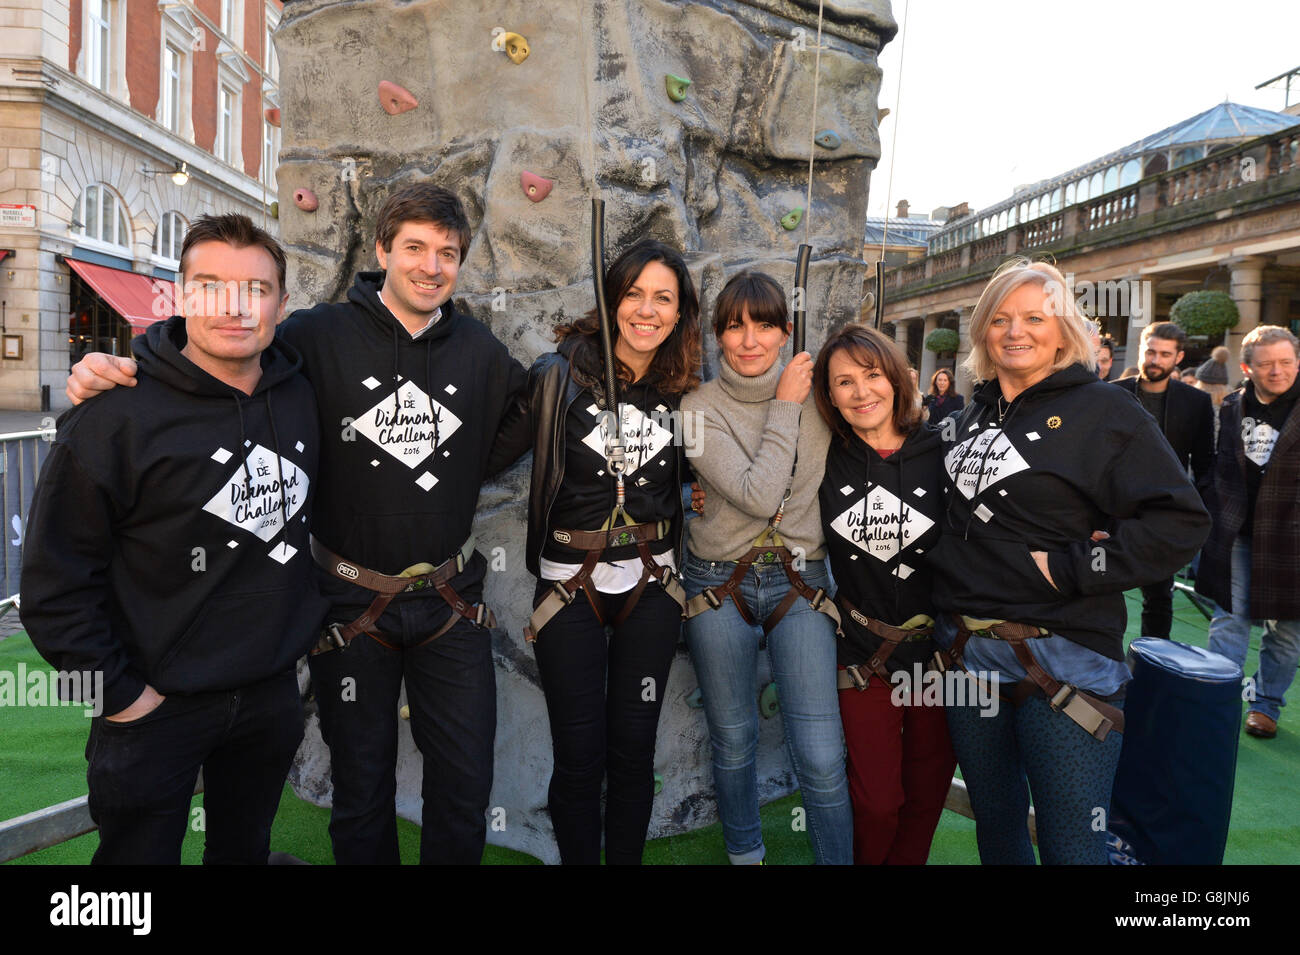 (left-right) Greg Burns, Zac Purchase, Julia Bradbury, Davina McCall, Arlene Phillips and Alice Beer pictured with a climbing wall in Covent Garden, London, to kick off the Duke of Edinburgh's Award Diamond Challenge. PRESS ASSOCIATION Photo. Picture date: Tuesday, 12 January 2016. Photo credit should read: Matt Crossick/PA Wire. Over the course of the day visitors will climb the height of Ben Nevis on the climbing wall - to mark the 60th anniversary of the charity. Stock Photo